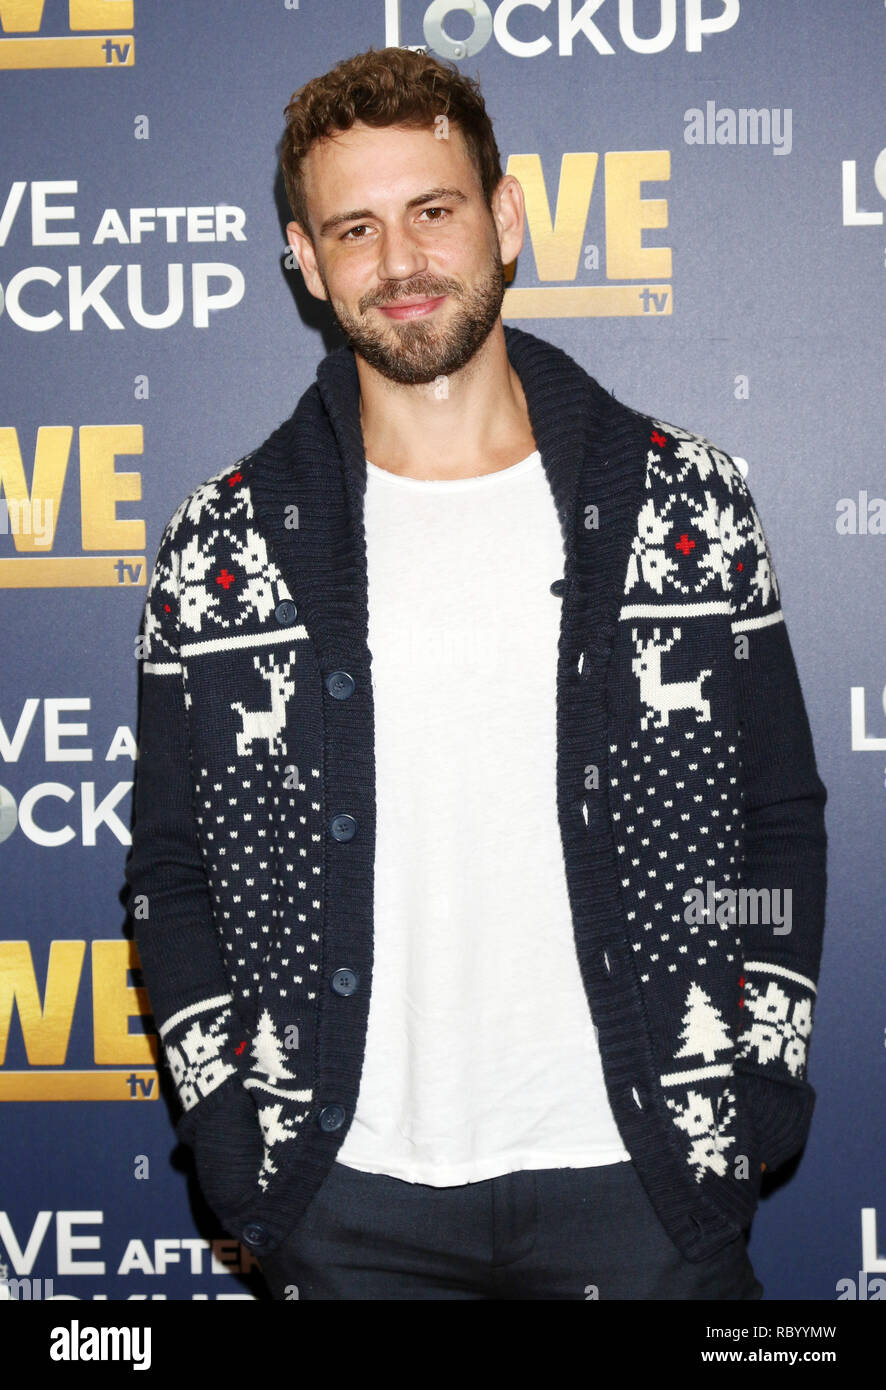 WE TV celebrates the return of 'Love After Lockup' with panel, 'Real Love: Relationship Reality TV's Past, Present & Future,' at The Paley Center for Media  Featuring: Nick Viall Where: Beverly Hills, California, United States When: 12 Dec 2018 Credit: Nicky Nelson/WENN.com Stock Photo